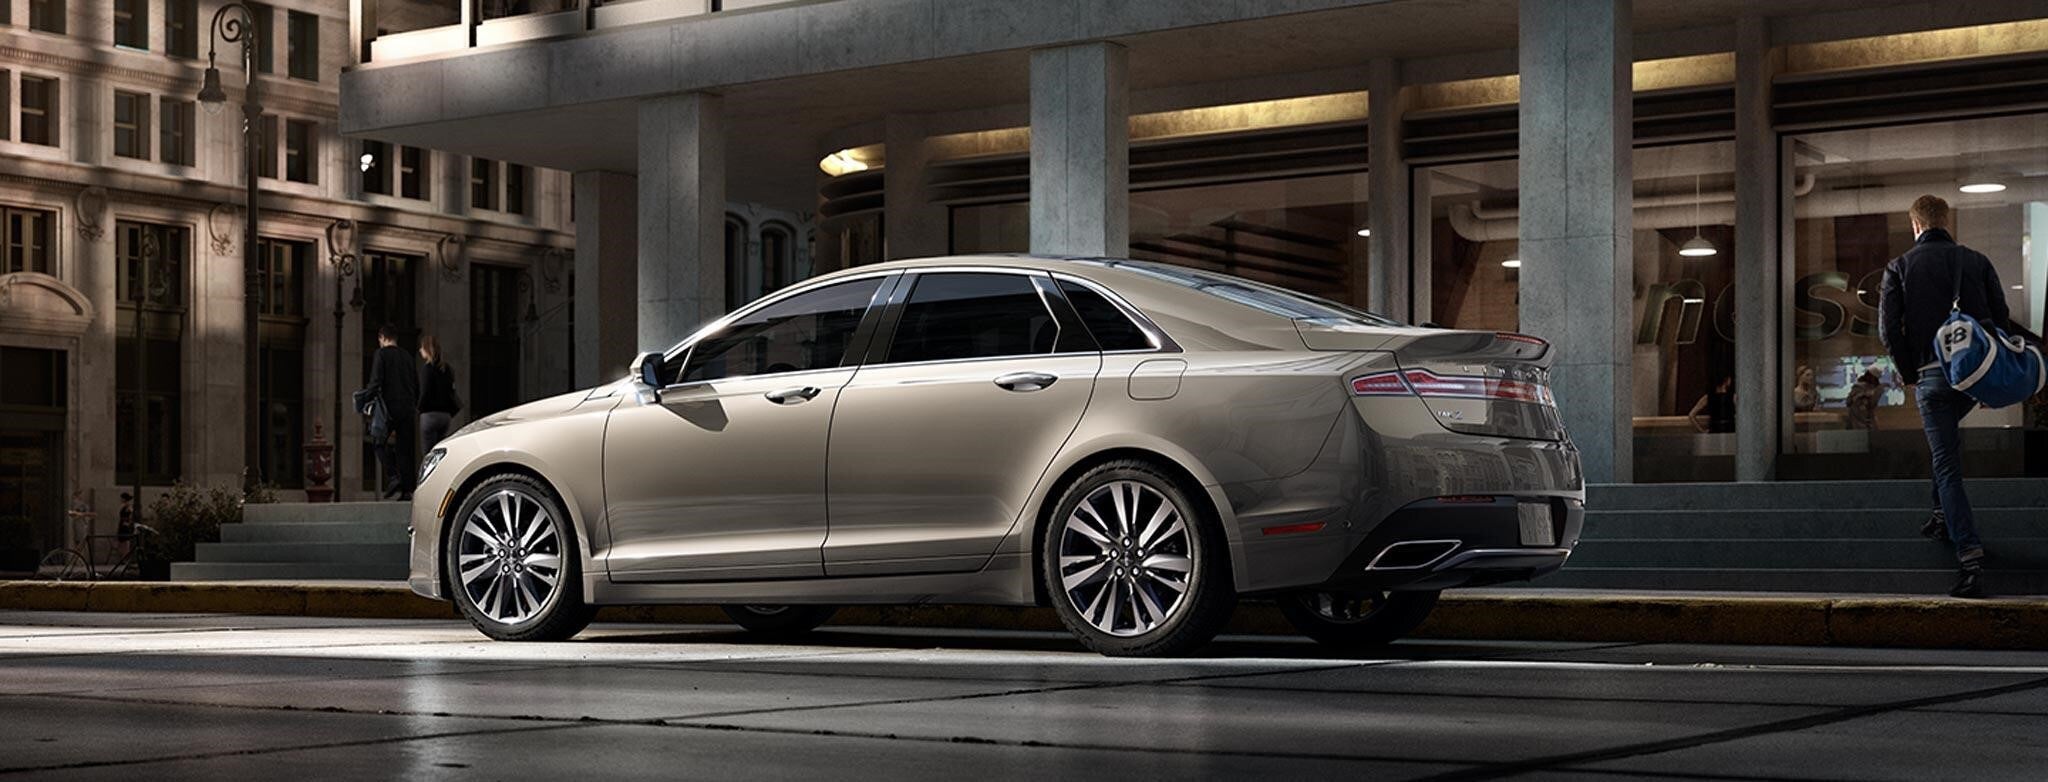 2017 Lincoln MKZ from Pascagoula, MS